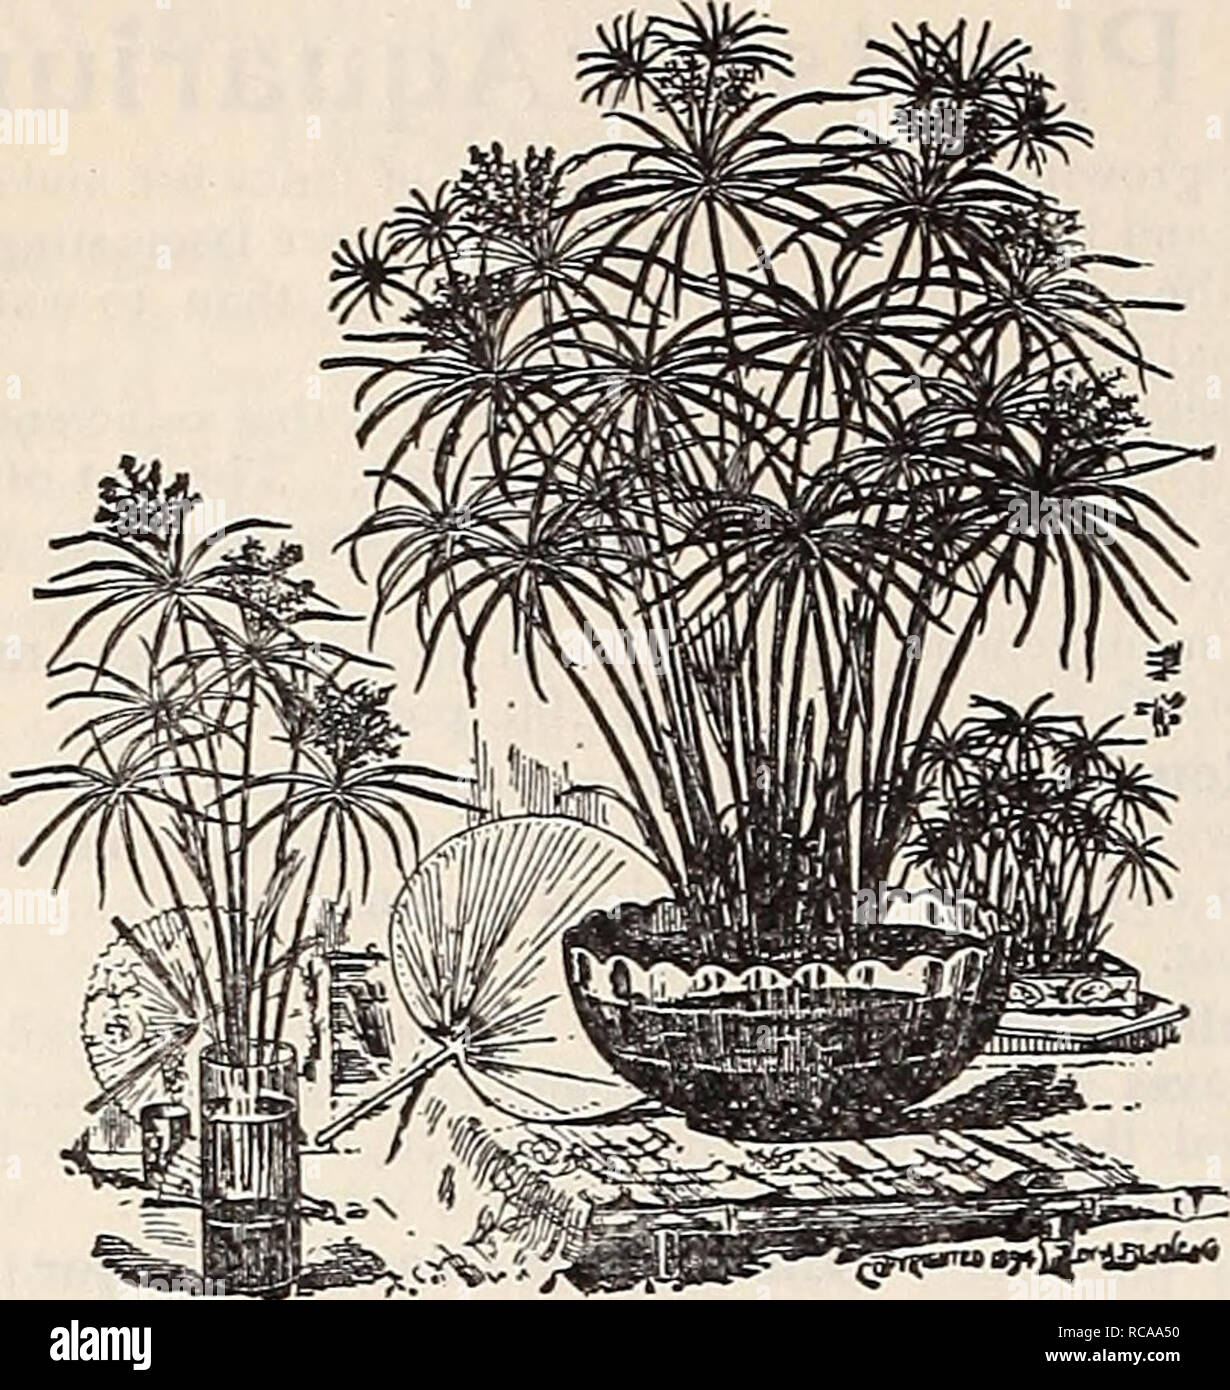 . Dreer's 1907 garden book. Seeds Catalogs; Nursery stock Catalogs; Gardening Equipment and supplies Catalogs; Flowers Seeds Catalogs; Vegetables Seeds Catalogs; Fruit Seeds Catalogs. 212 fJUhHEHRTADREER -PHILADELPHIA^A^WATER LILIES*&quot; AQUATICS- !. Cyperus Alternifolius. niscellaneous Aquatics. See also under Aquarium Plants oil preceding page. Acorus Japotlica Variegata {Variegated Sweet Flag). One of the finest variegated plants in cultivation. 25 cts. each ; $2.50 per doz. — Gramineus Variegatus. Dwarf growing, with leathery leaves, beautifully margined with white; handsome plant for ma Stock Photo